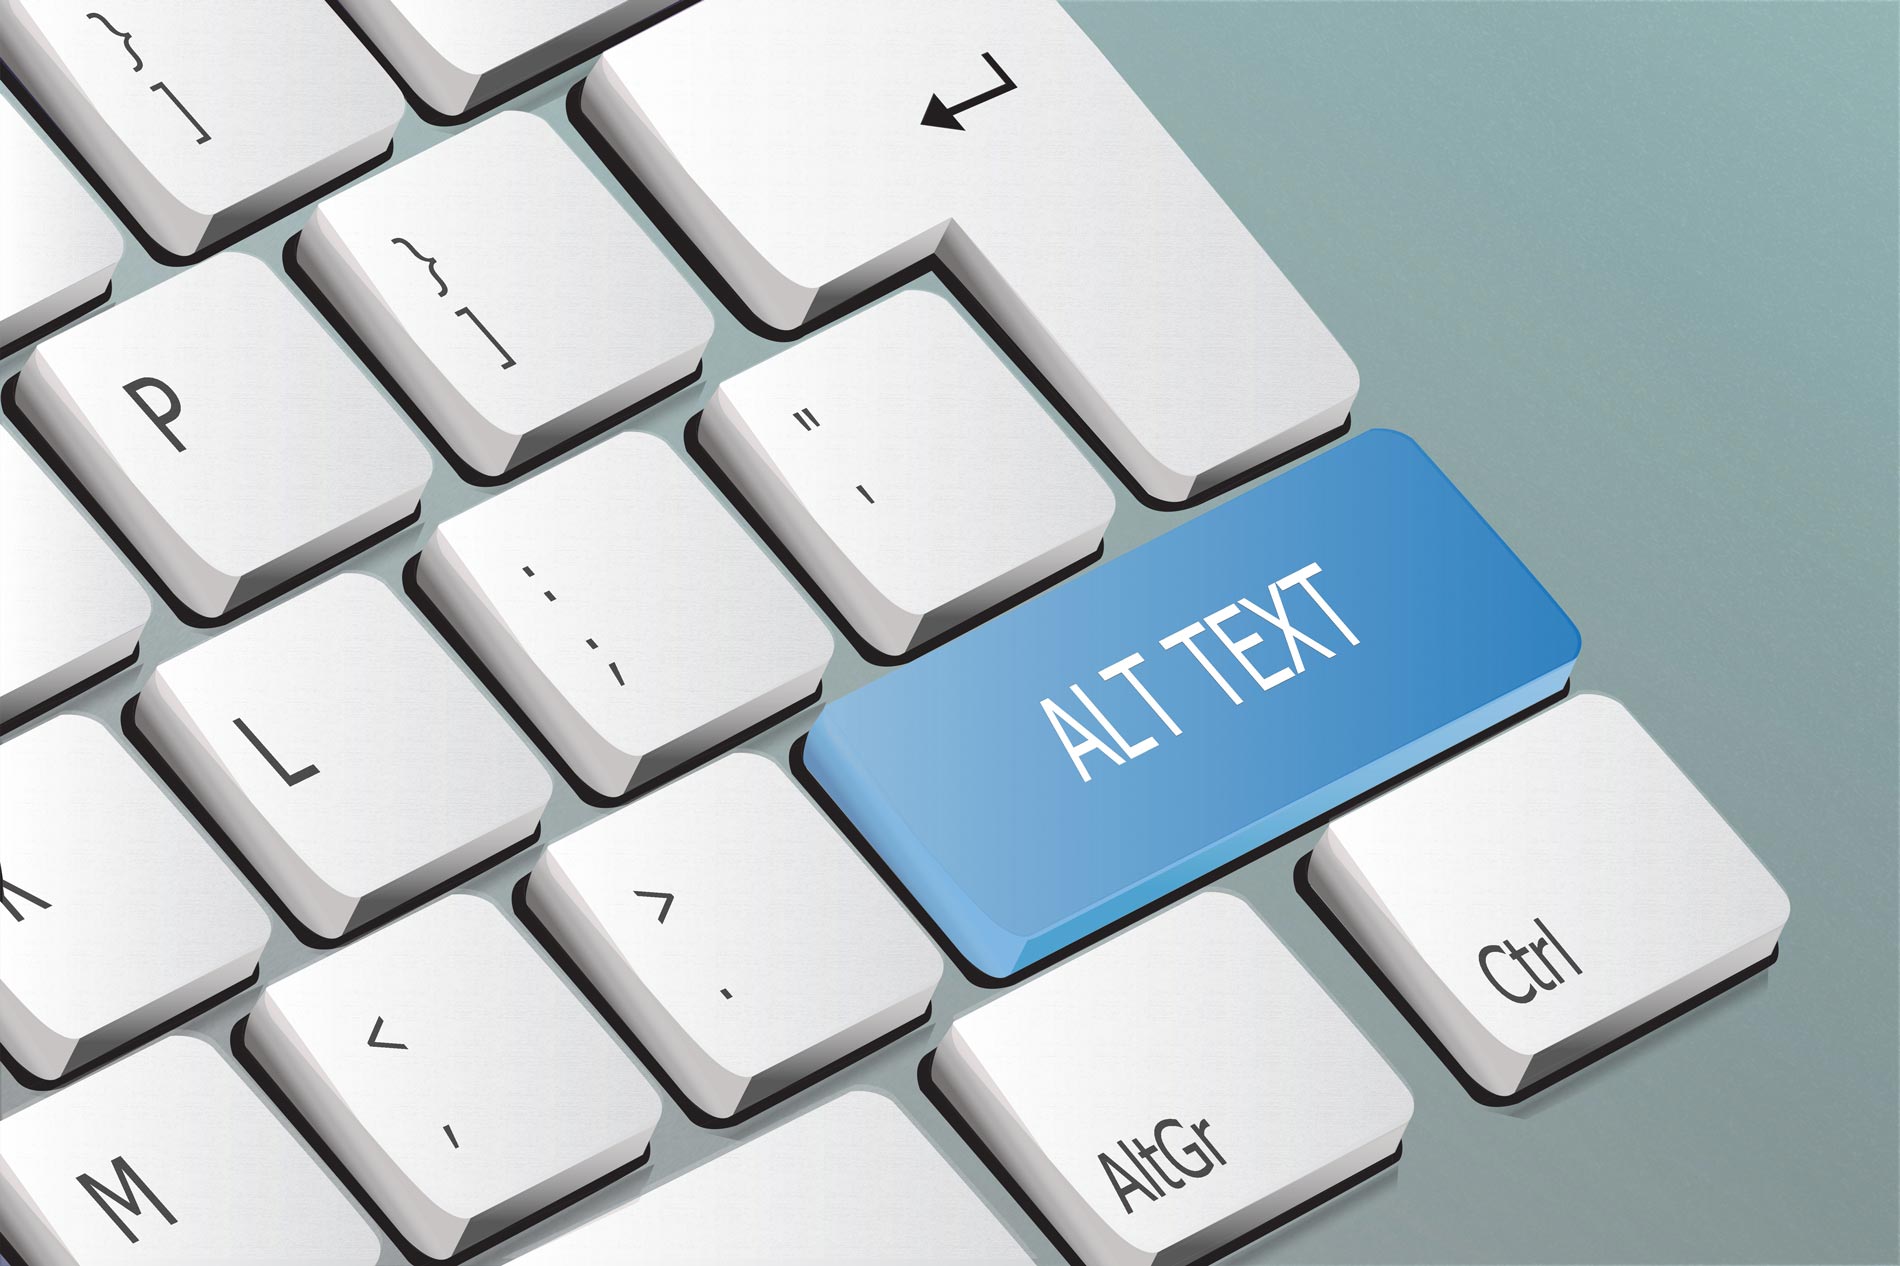 Keyboard with blue button that reads "Alt Text"